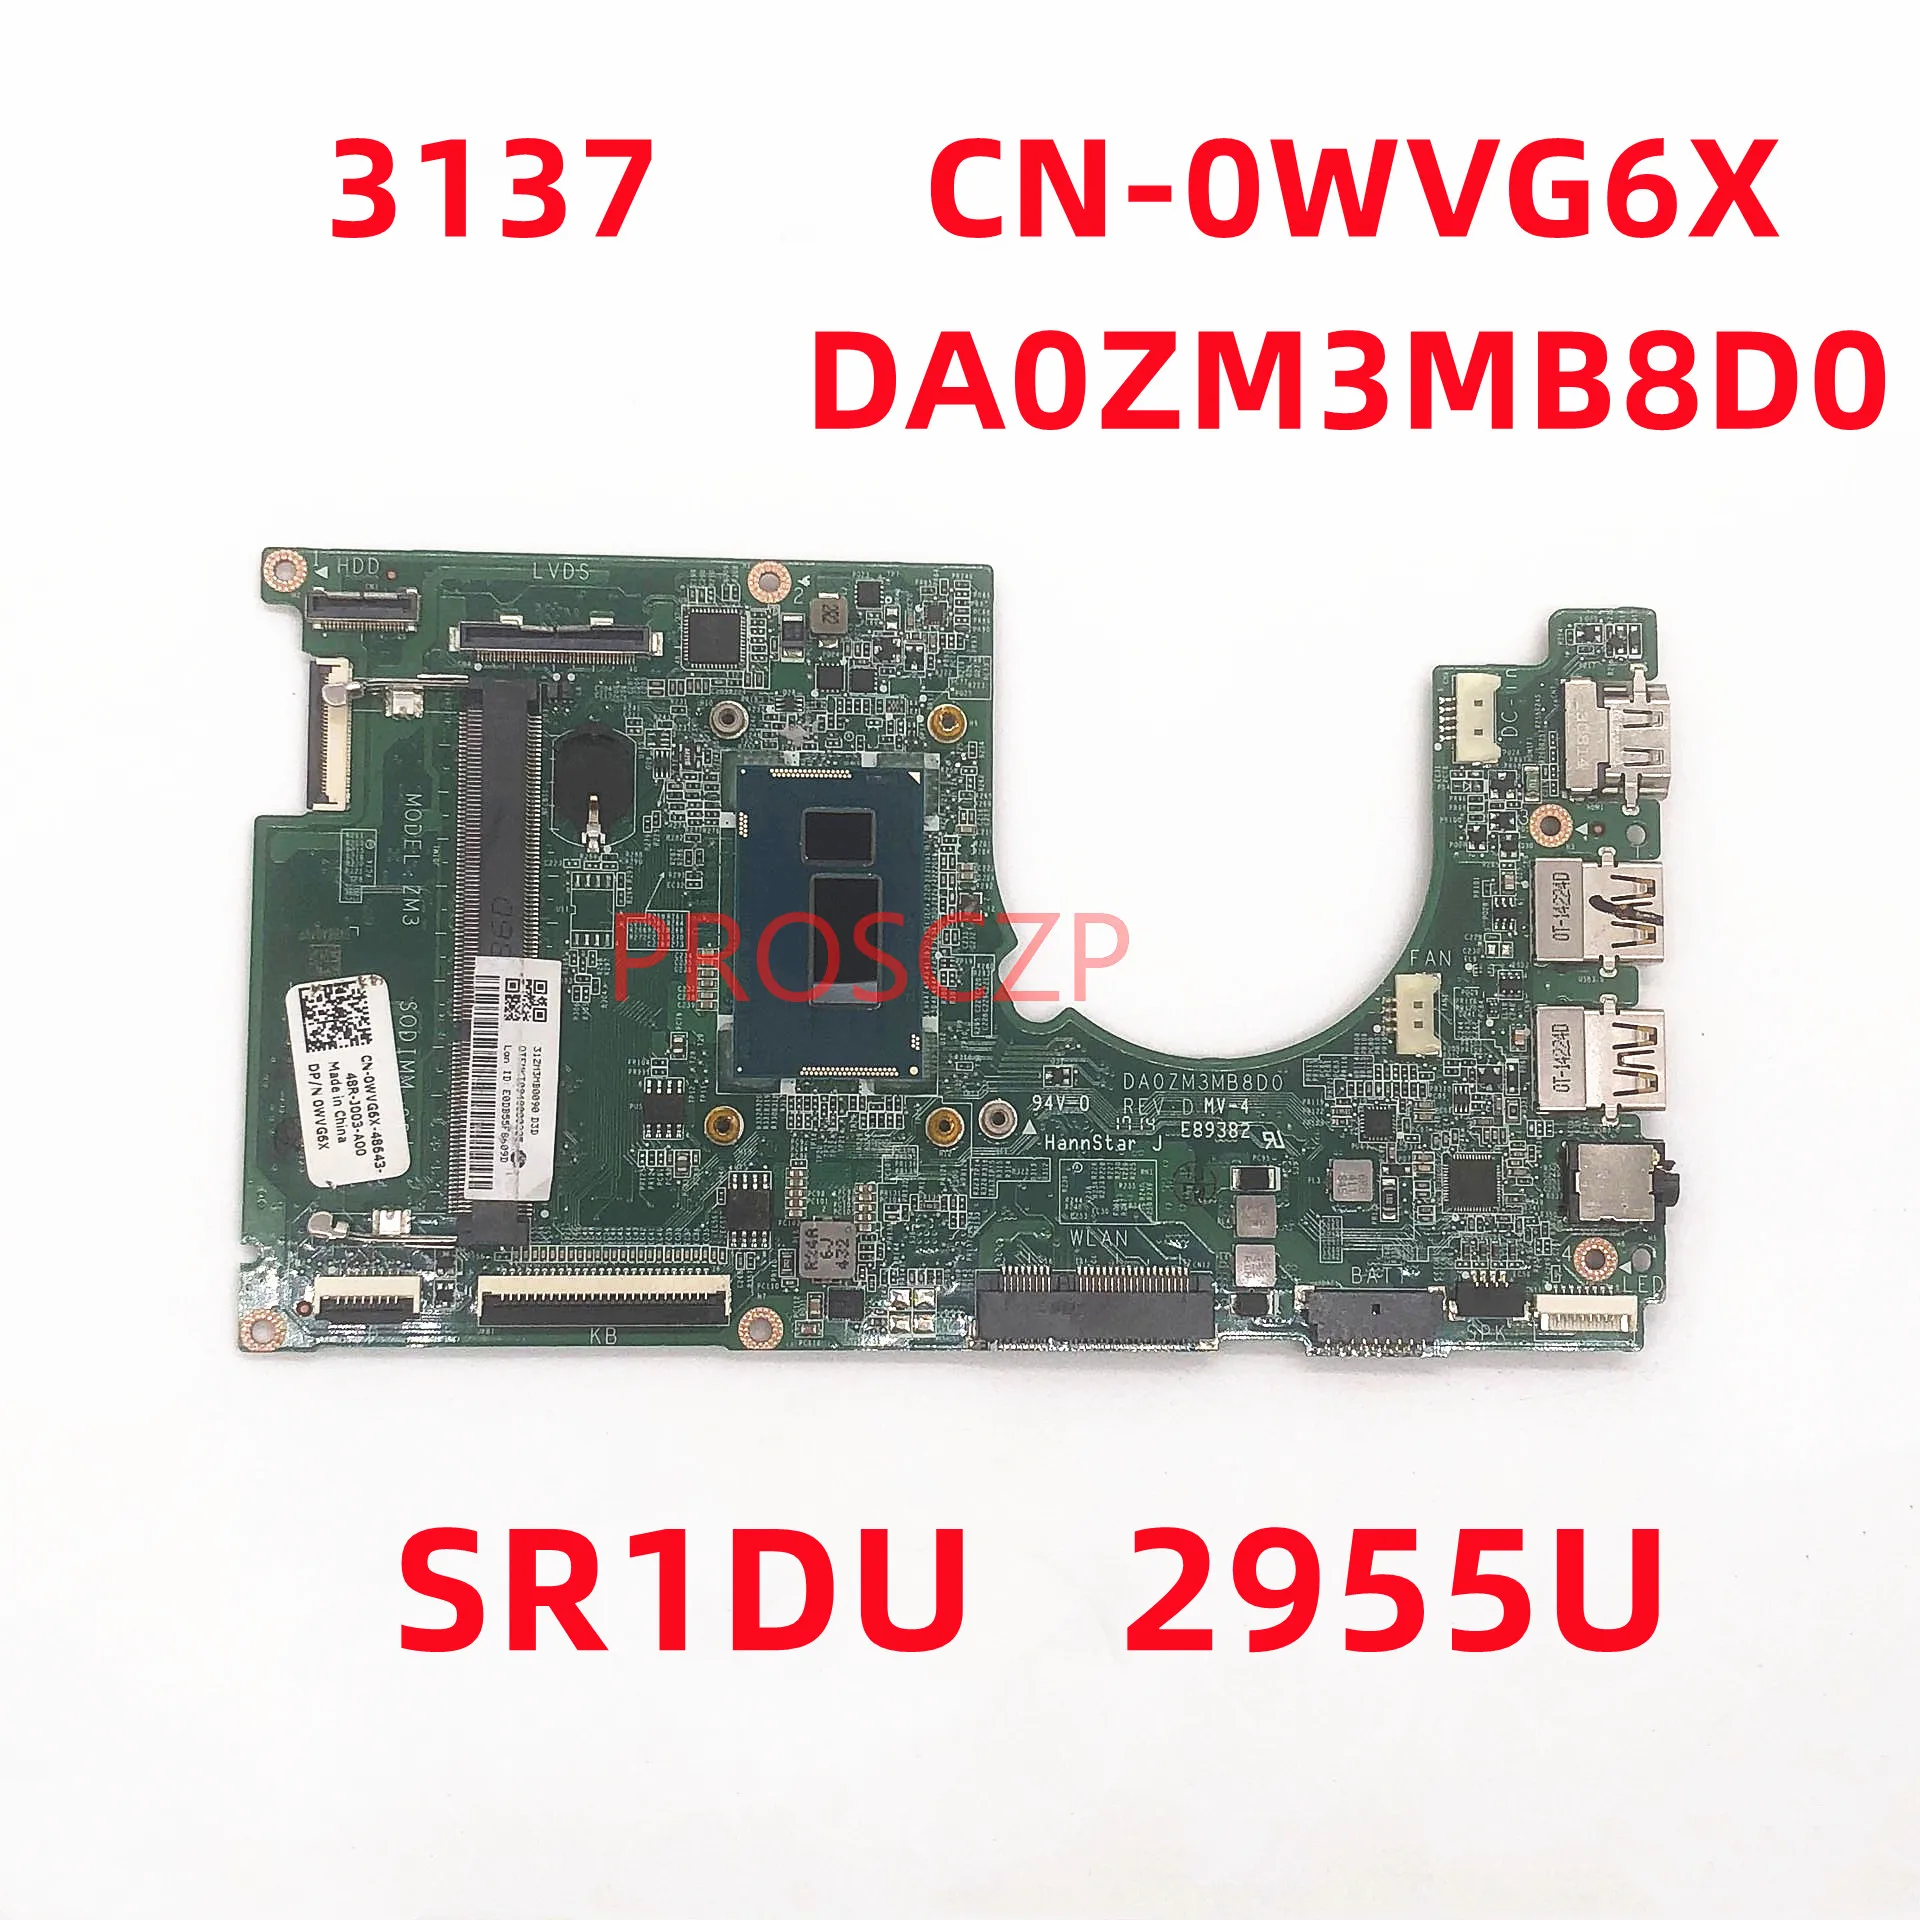 Mainboard CN-0WVG6X 0WVG6X WVG6X For DELL Inspiron 11 3137 Laptop Motherboard DA0ZM3MB8D0 With SR1DU 2955U CPU 100% Full Tested